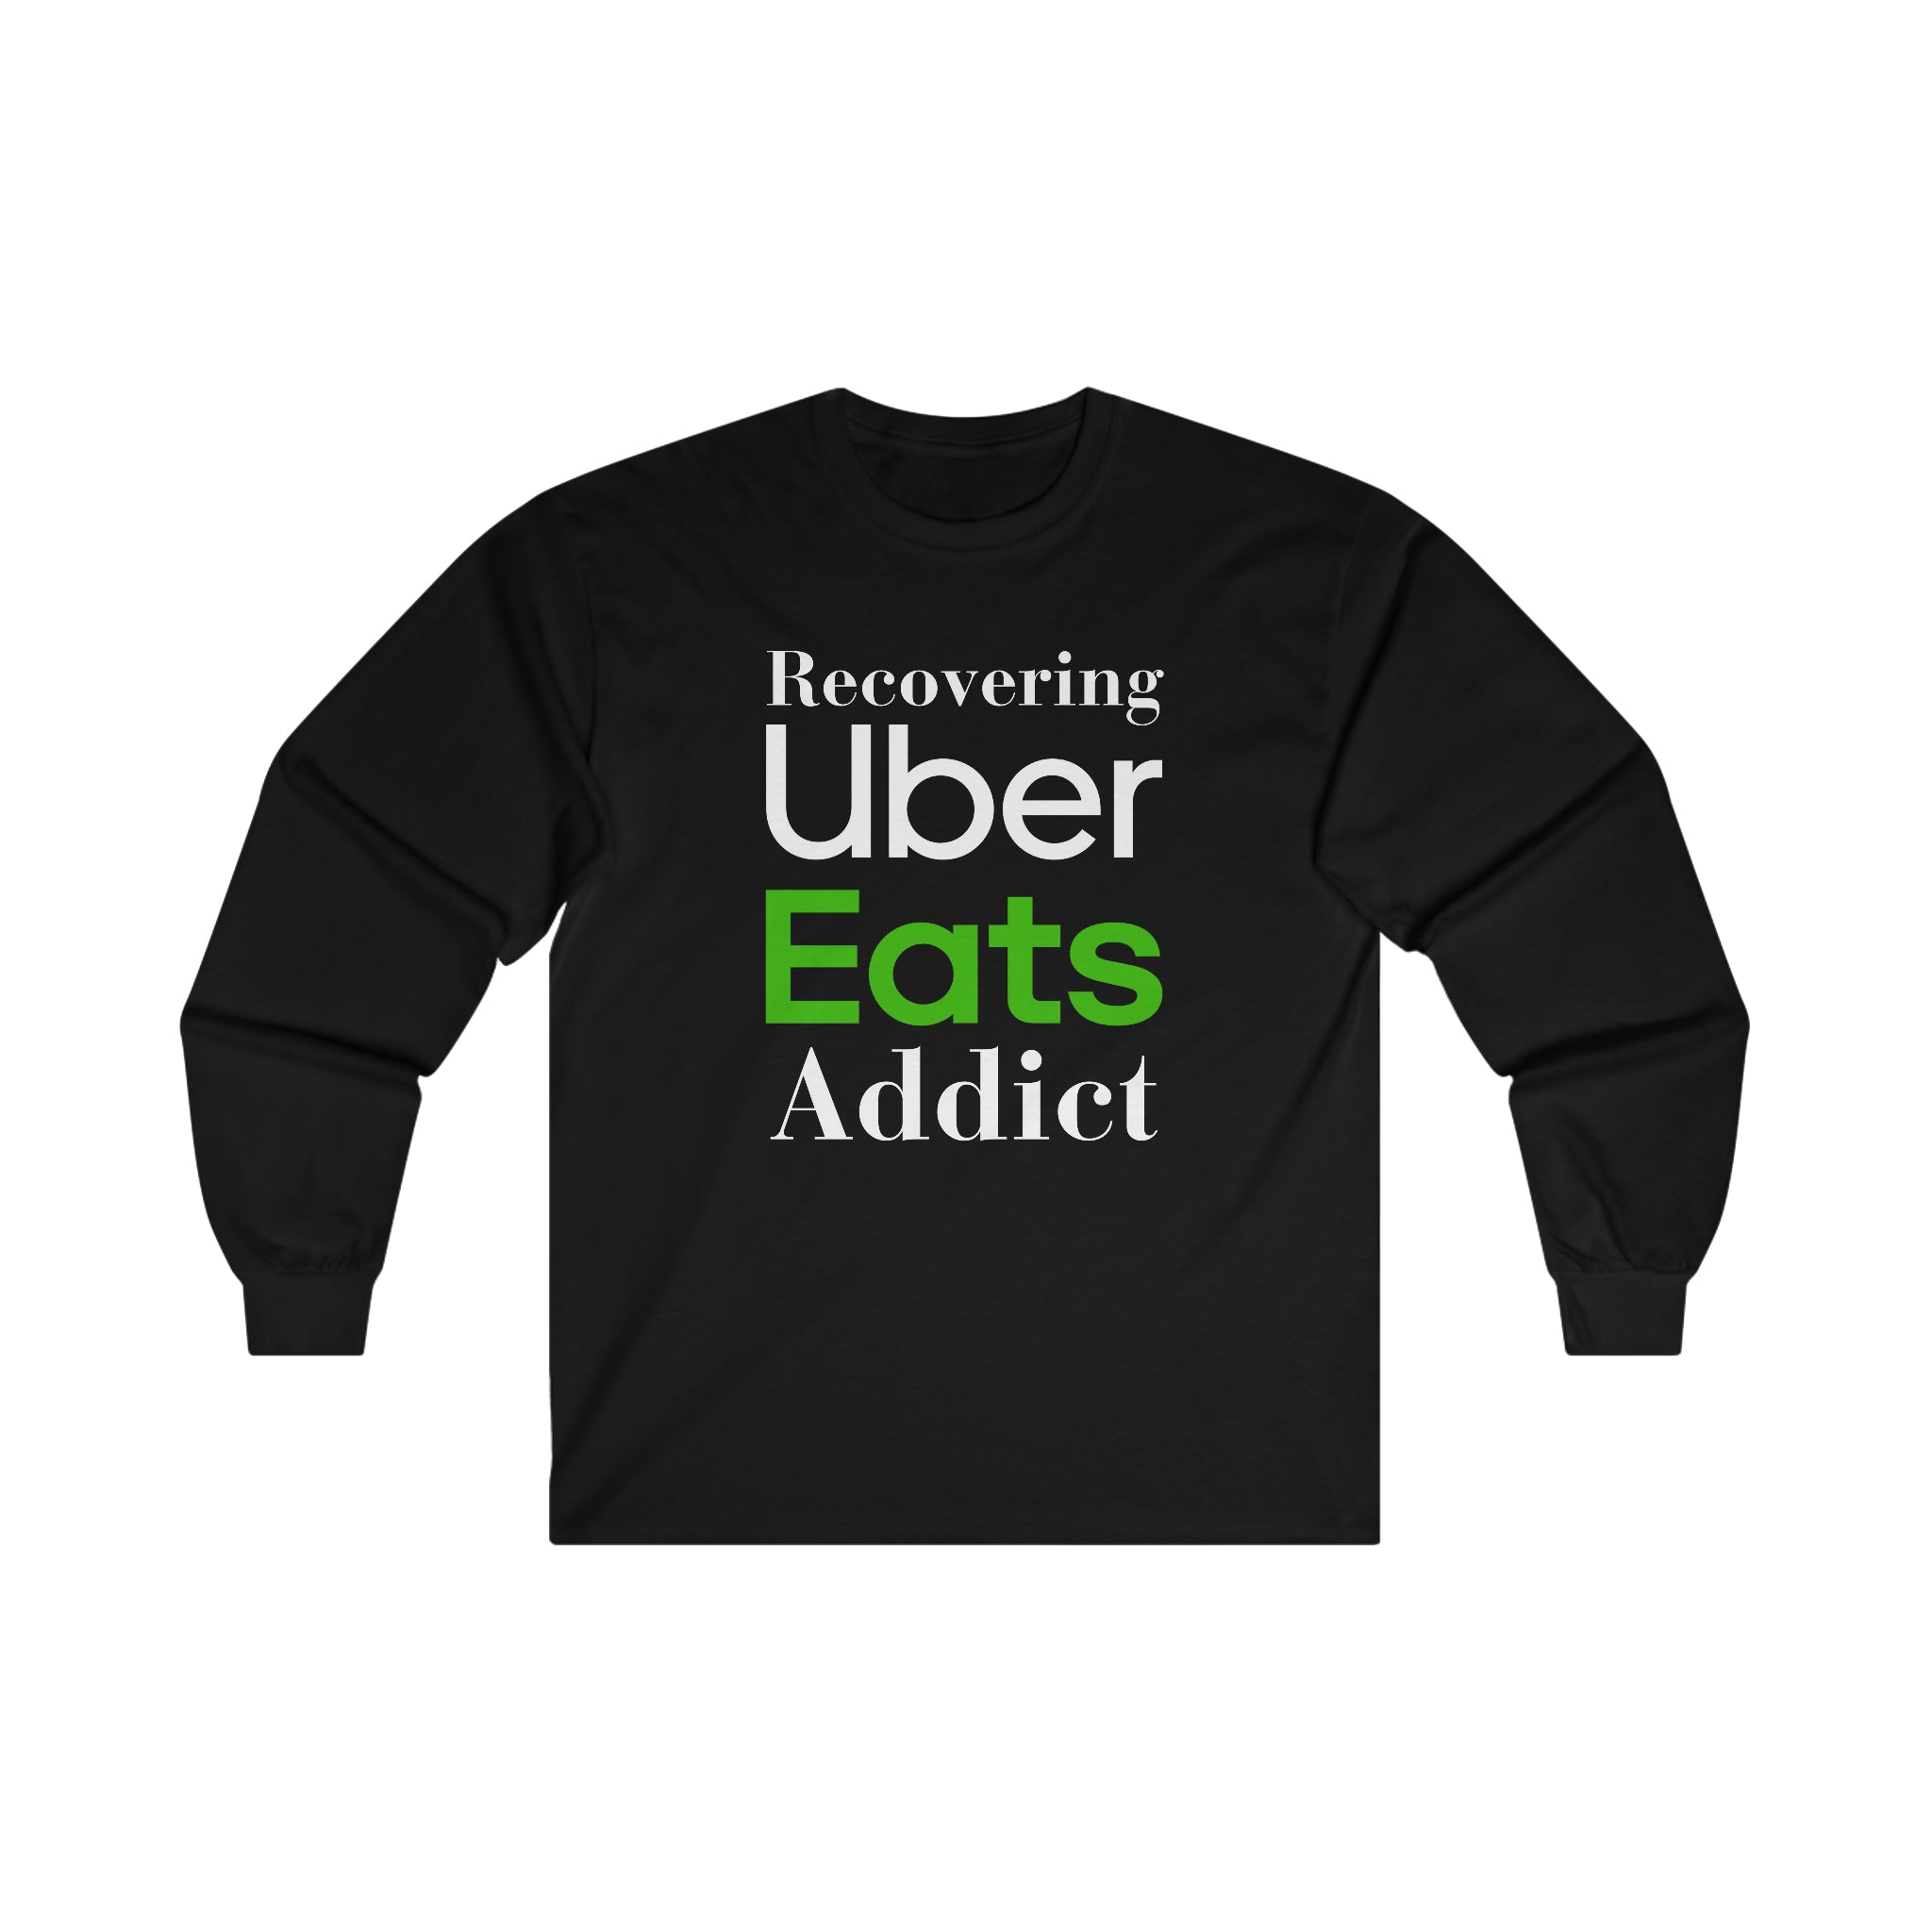 Recovering Uber Eats Addict - Ultra Cotton Long Sleeve Tee